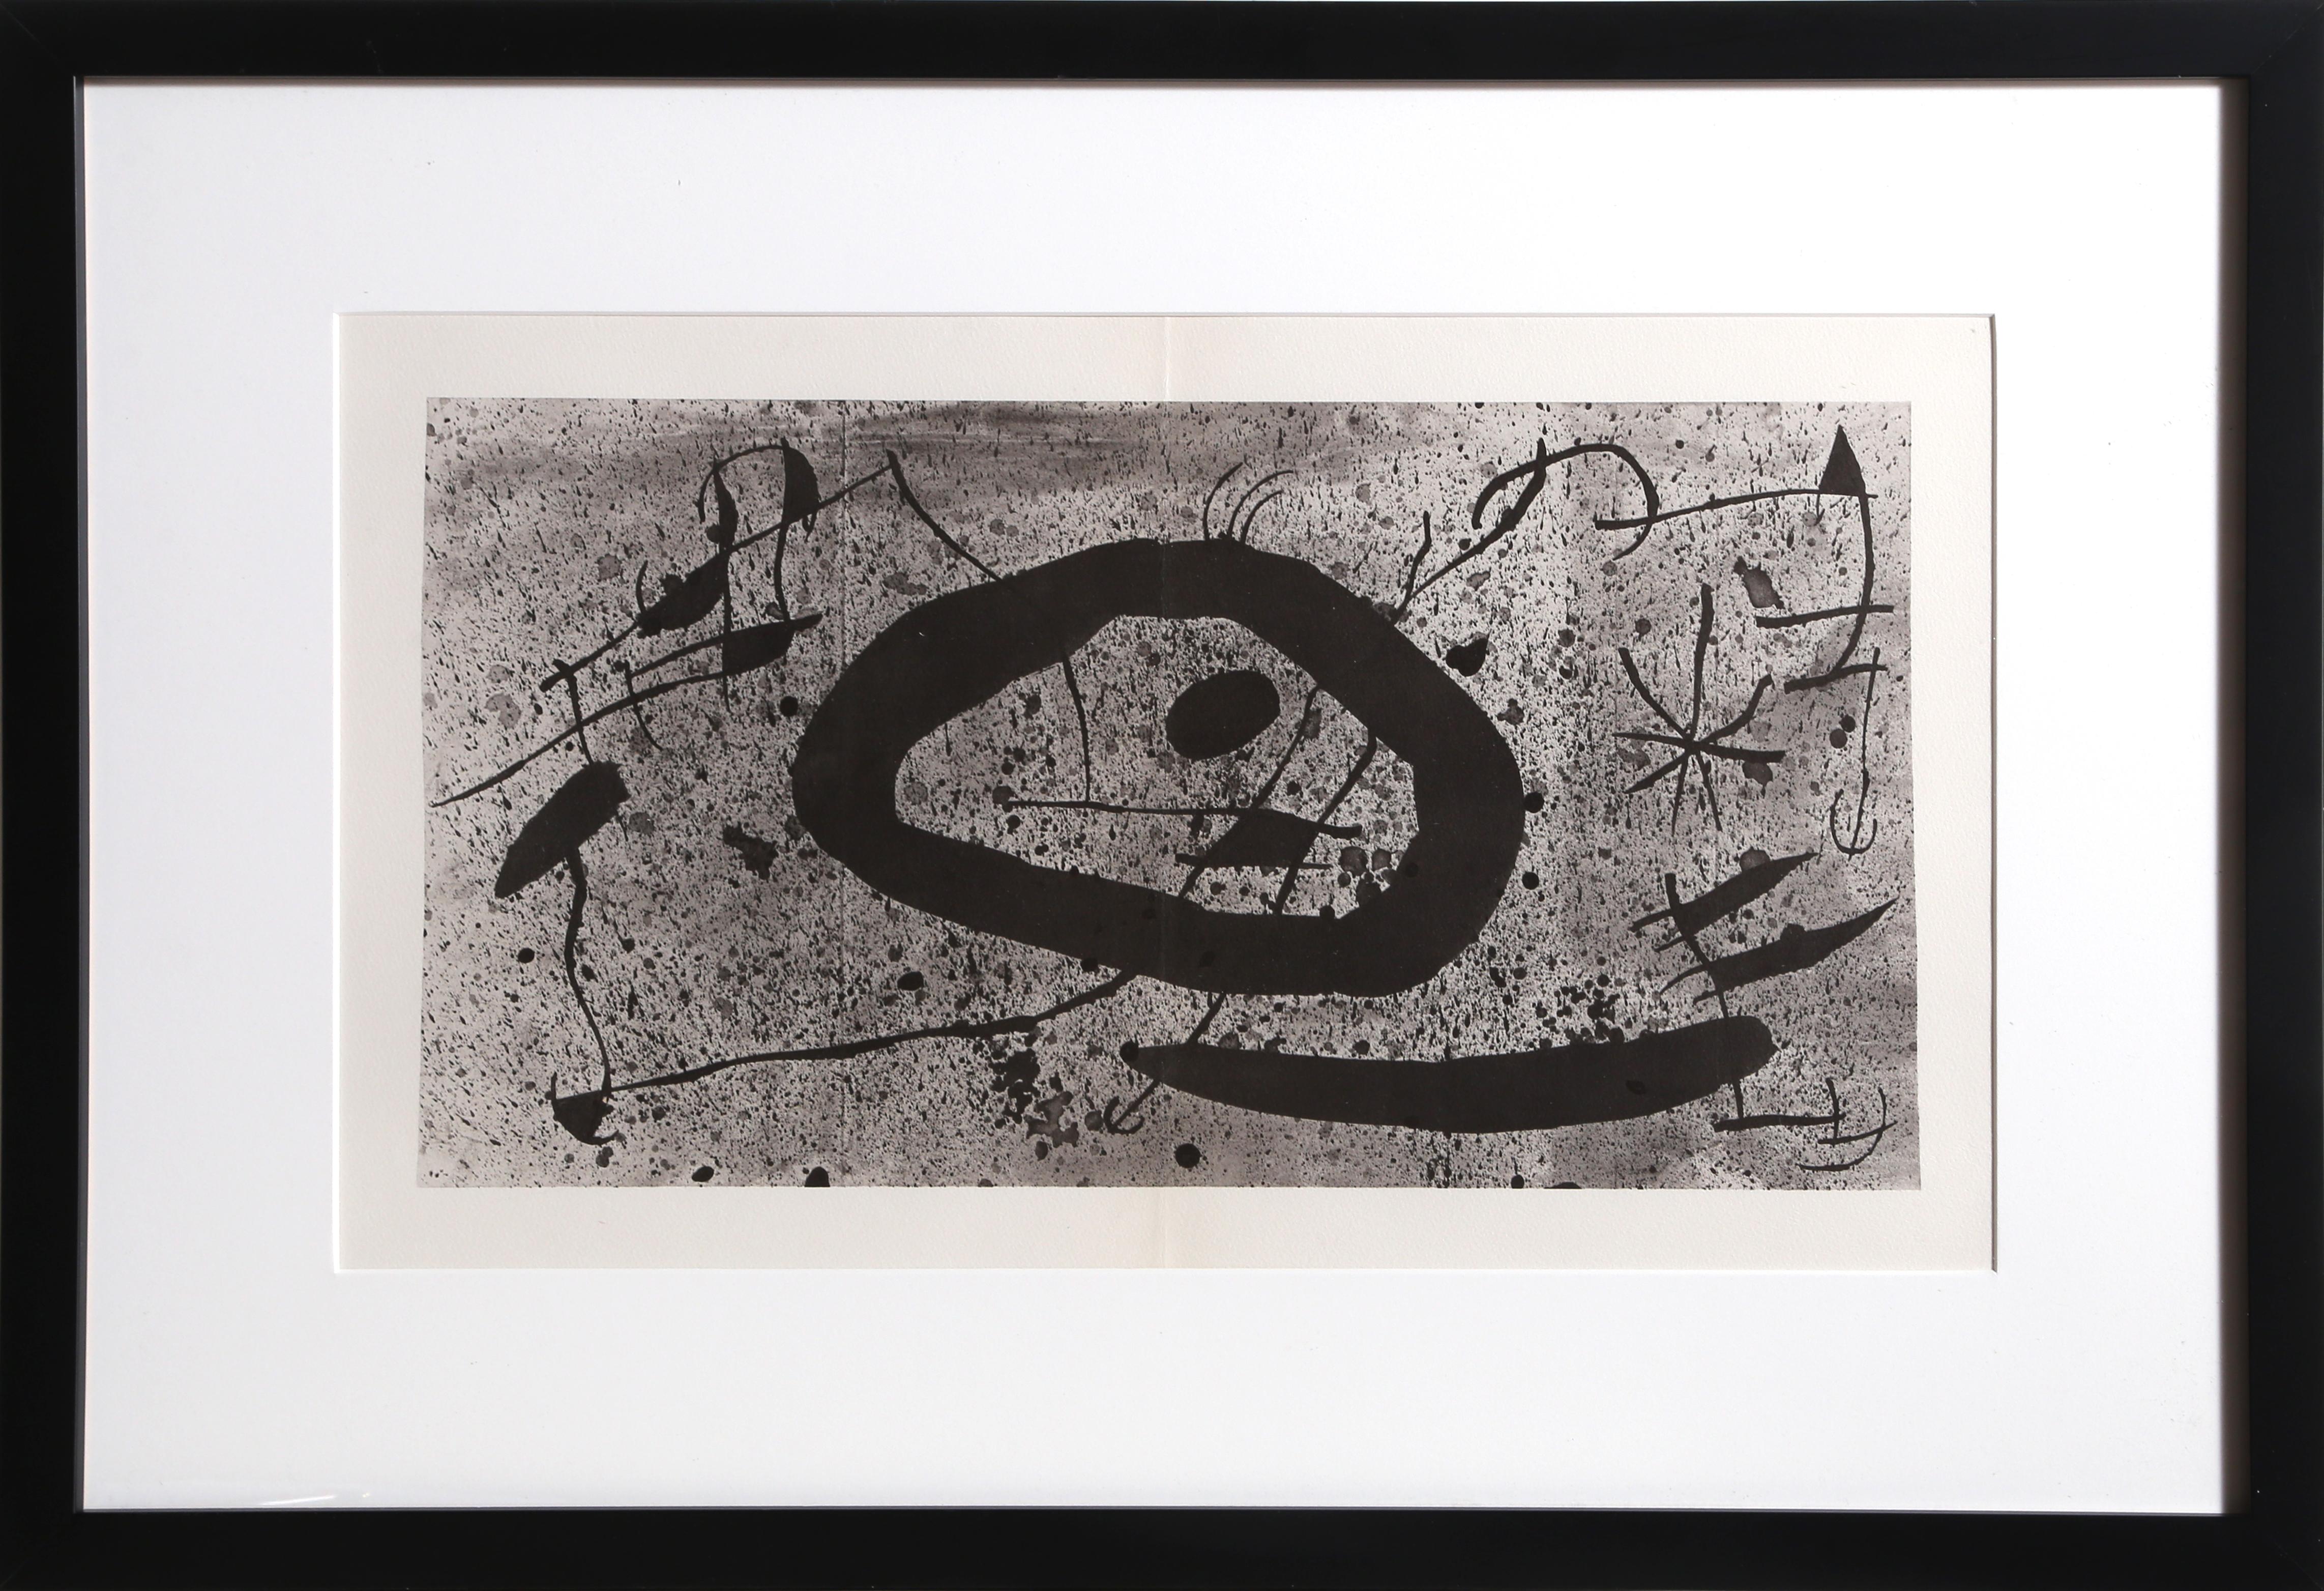 Artist: Joan Miro, Spanish (1893 - 1983)
Title: Les Essencies de la Tierra
Year: 1968
Medium: Lithograph on Guarro
Edition: LX (60)
Size: 19.25  x 30.5 in. (48.9  x 77.47 cm)
Frame Size: 21.5 x 31.5 inches

Reference: no. 123 in Cramer "The